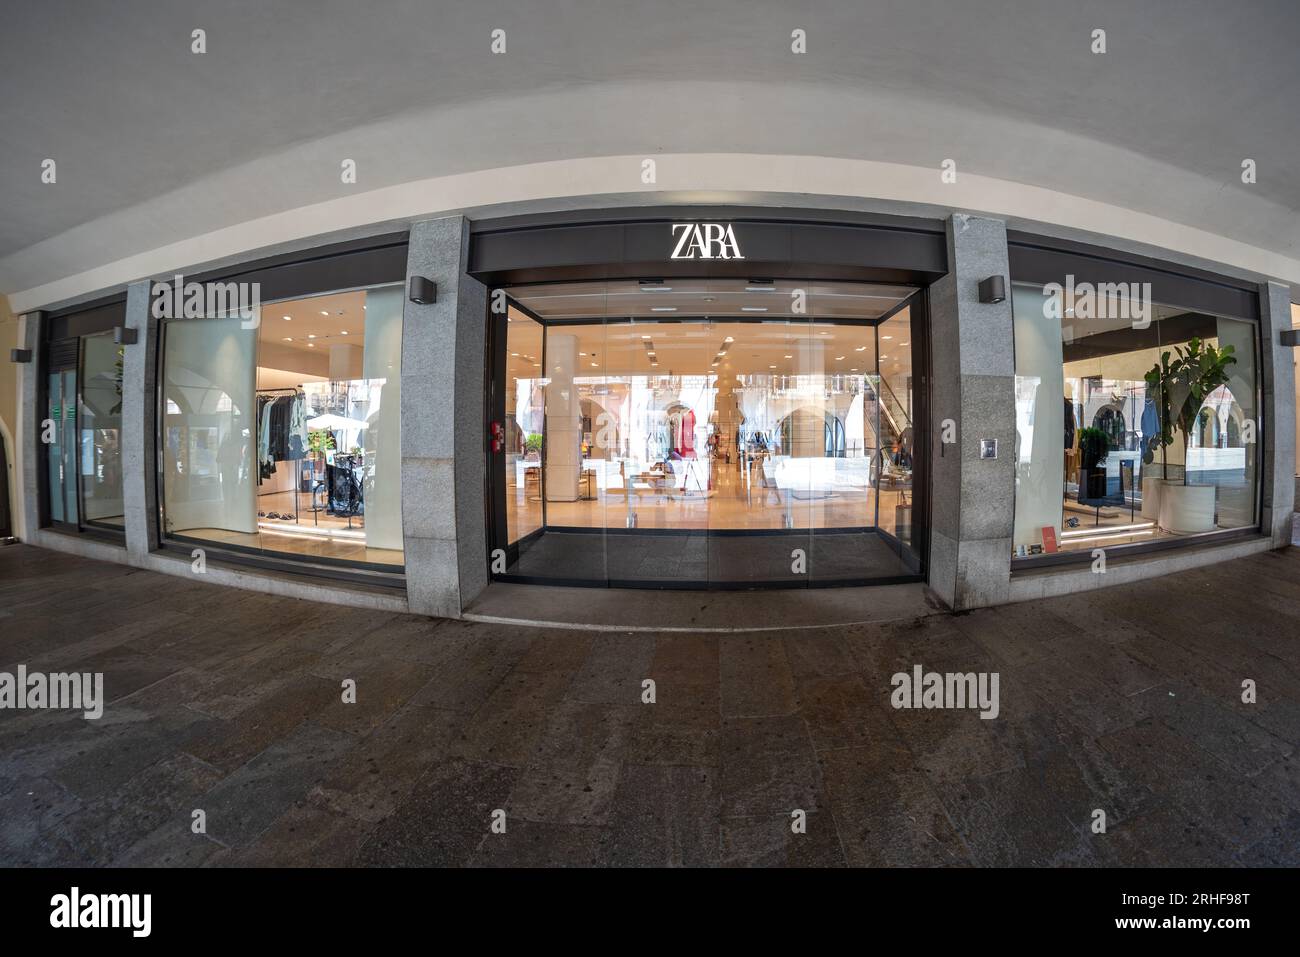 Cuneo, Piedmont, Italy - August 16, 2023: Zara store, exterior view of the store on Via Roma, Zara is a clothing and accessories brand owned by Spanis Stock Photo